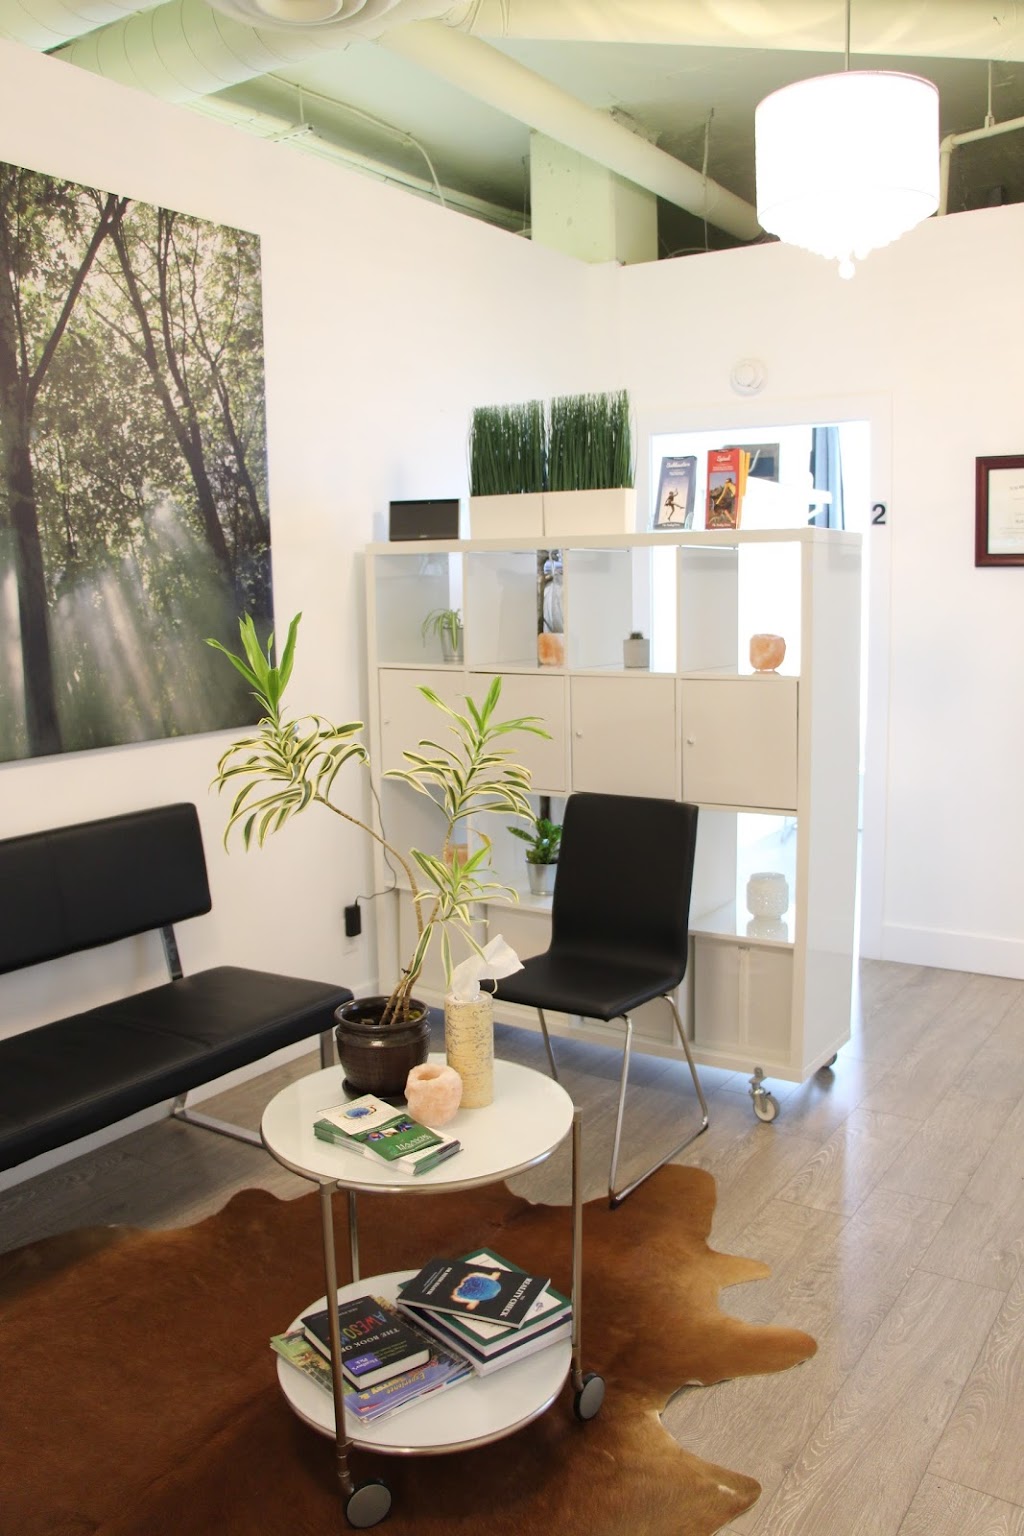 Life Force Chiropractic + Wellness | 2970 King George Blvd #9, Surrey, BC V4P 0E6, Canada | Phone: (604) 531-4990